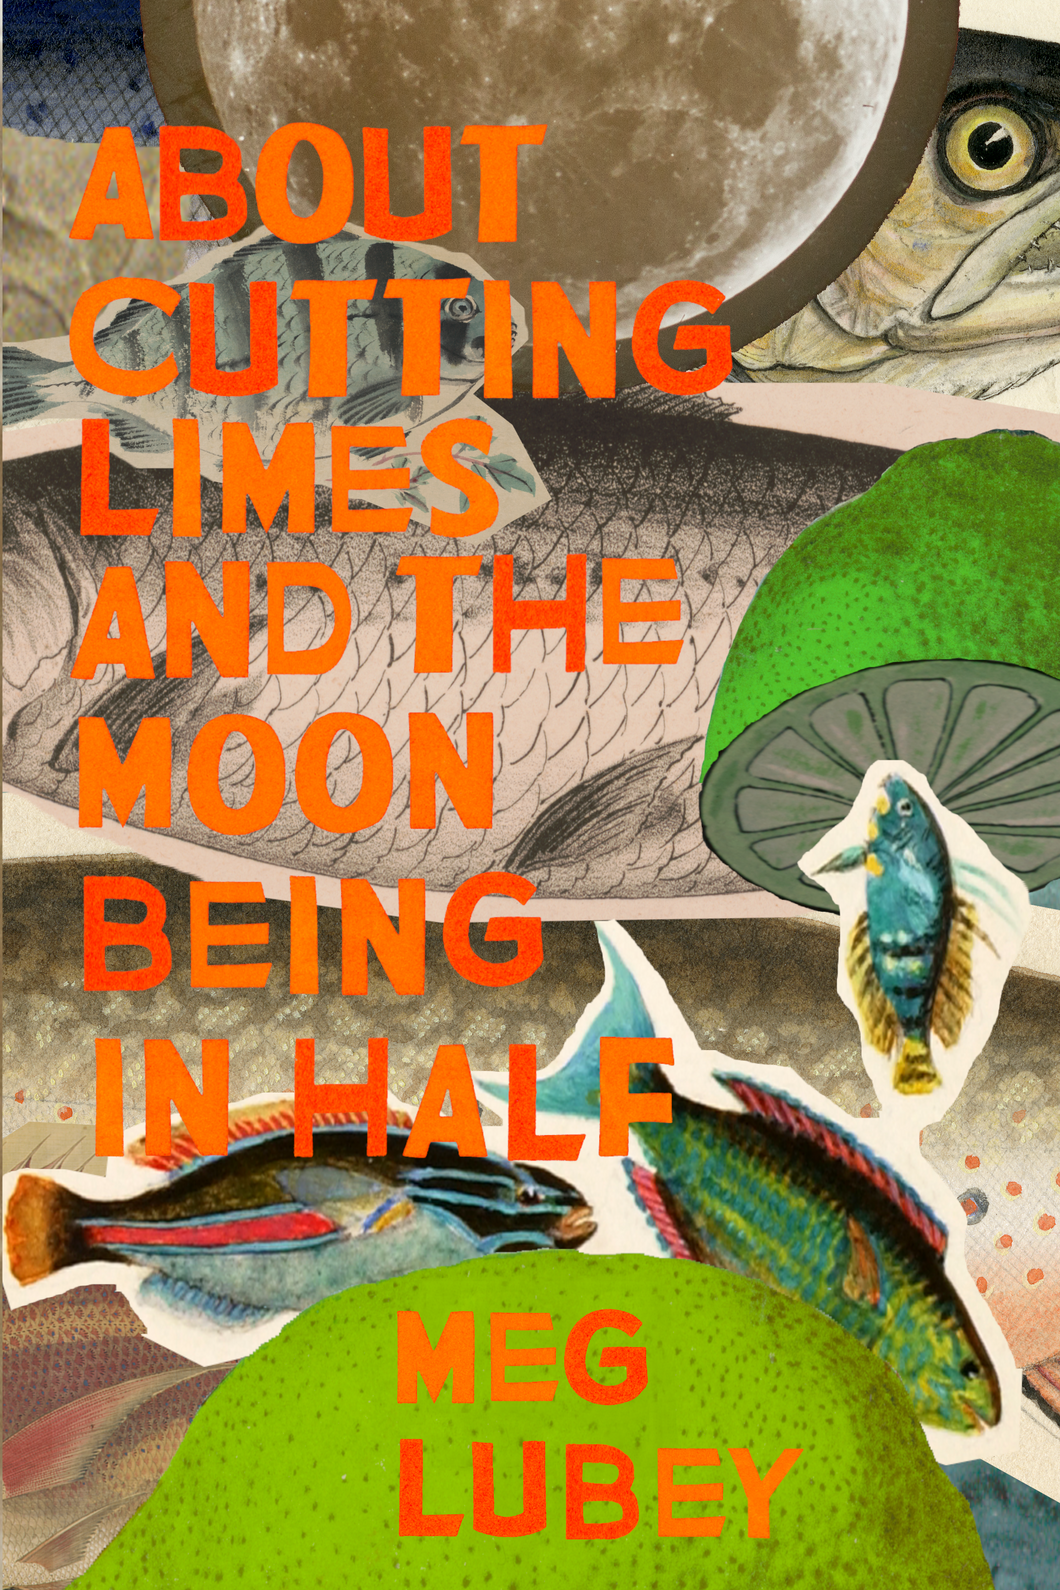 About Cutting Limes and the Moon Being in Half, by Meg Lubey-Print Books-Bottlecap Press